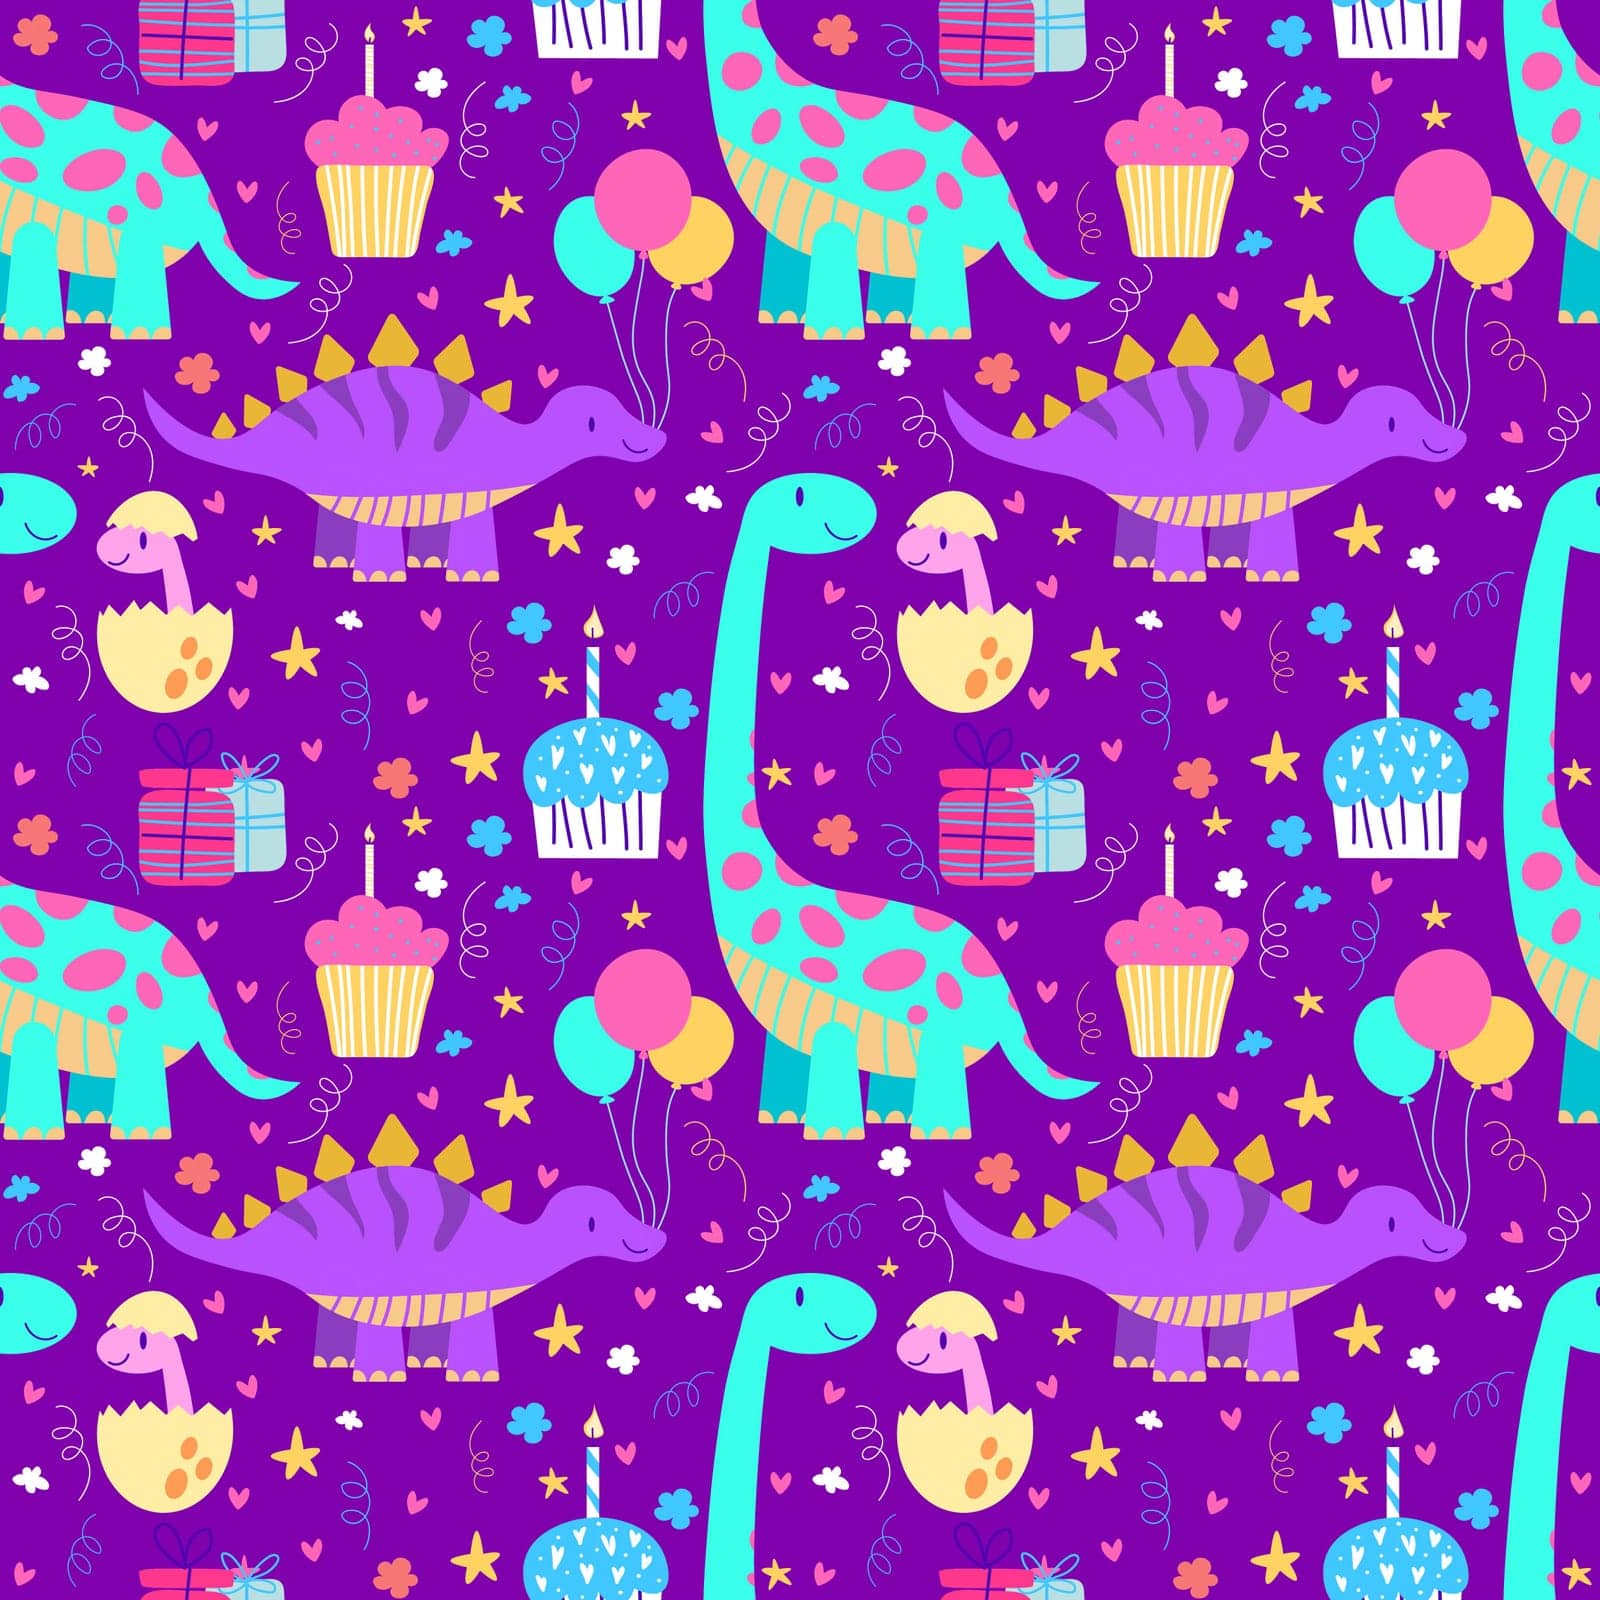 Dinosaur birthday party Dino seamless pattern kid holiday celebration illustration Baby design for birthday invitation or baby shower, poster, clothing, nursery wall art and card.